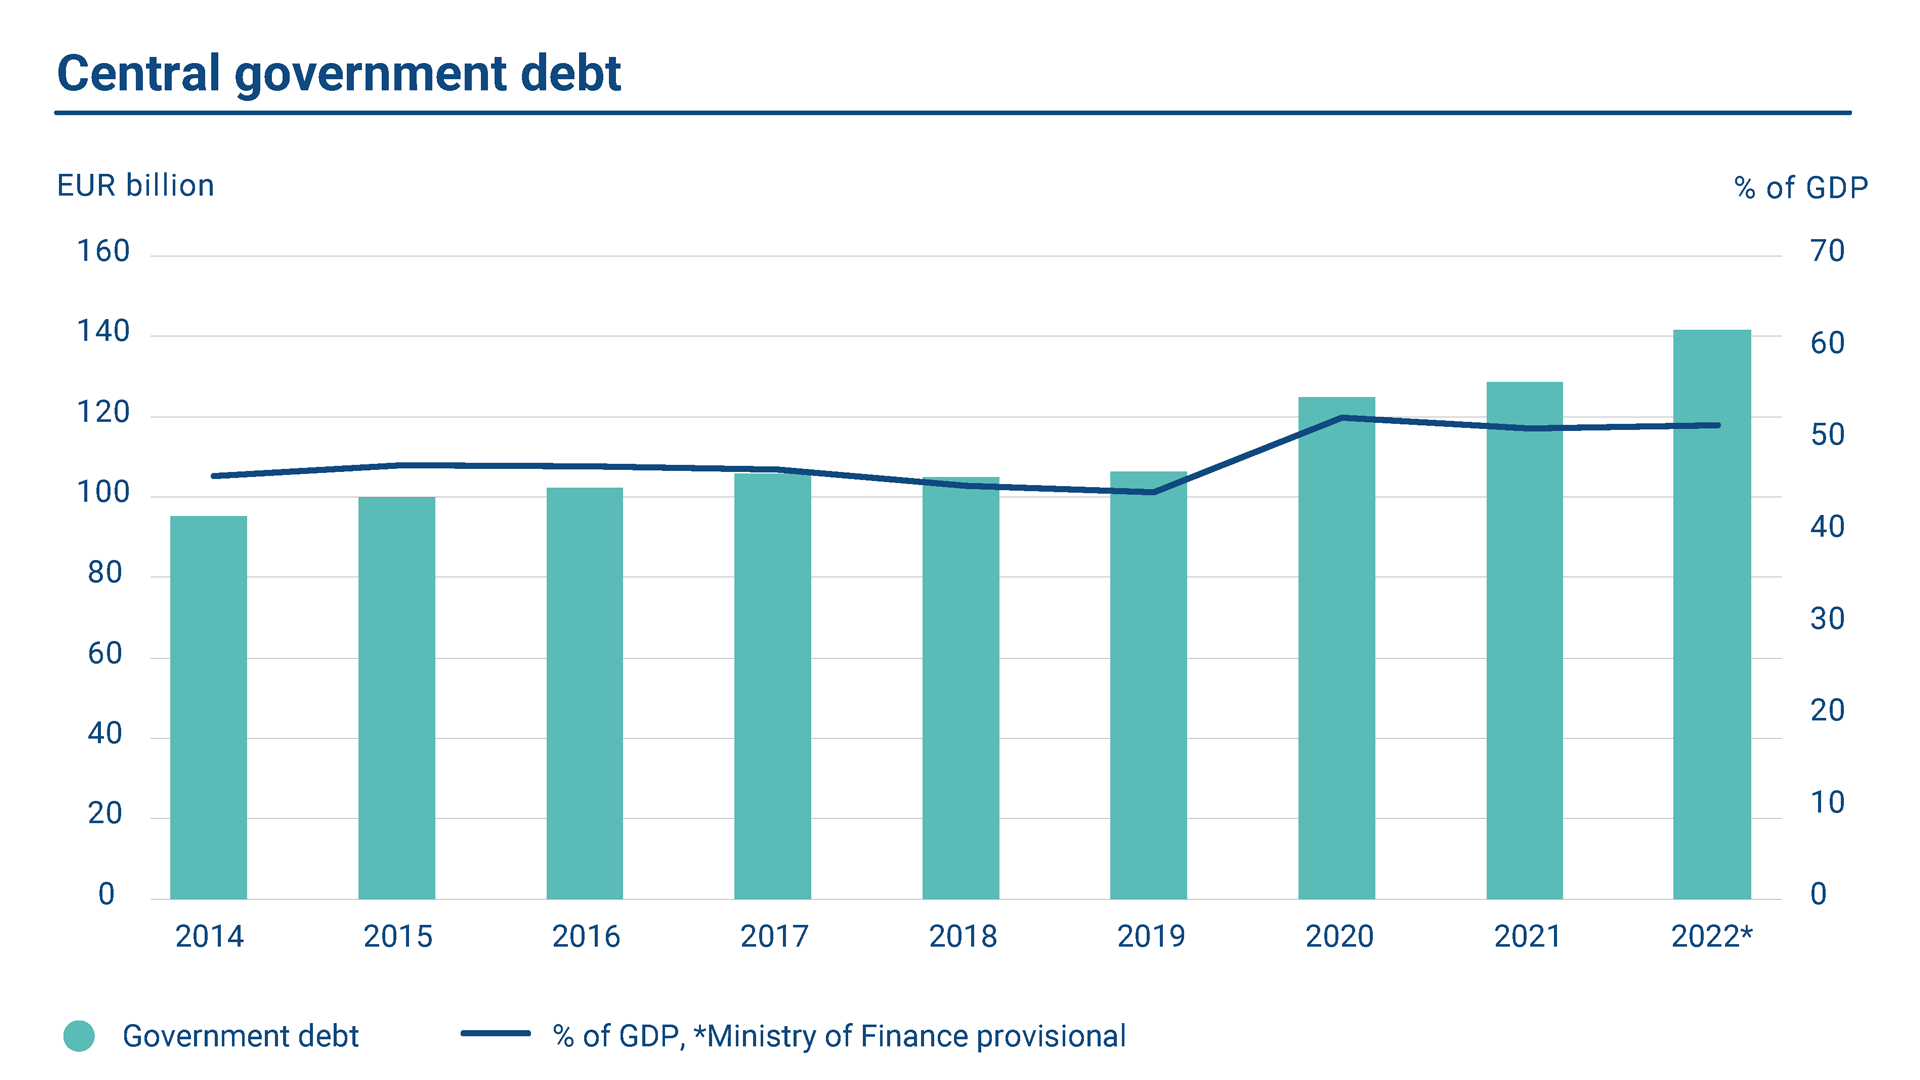 The graph shows the volume of Finland's central government debt and debt in relation to GDP in 2014-22. The central government debt was EUR 141.63 billion at the end of 2022. The debt-to-GDP ratio was 51.6%.